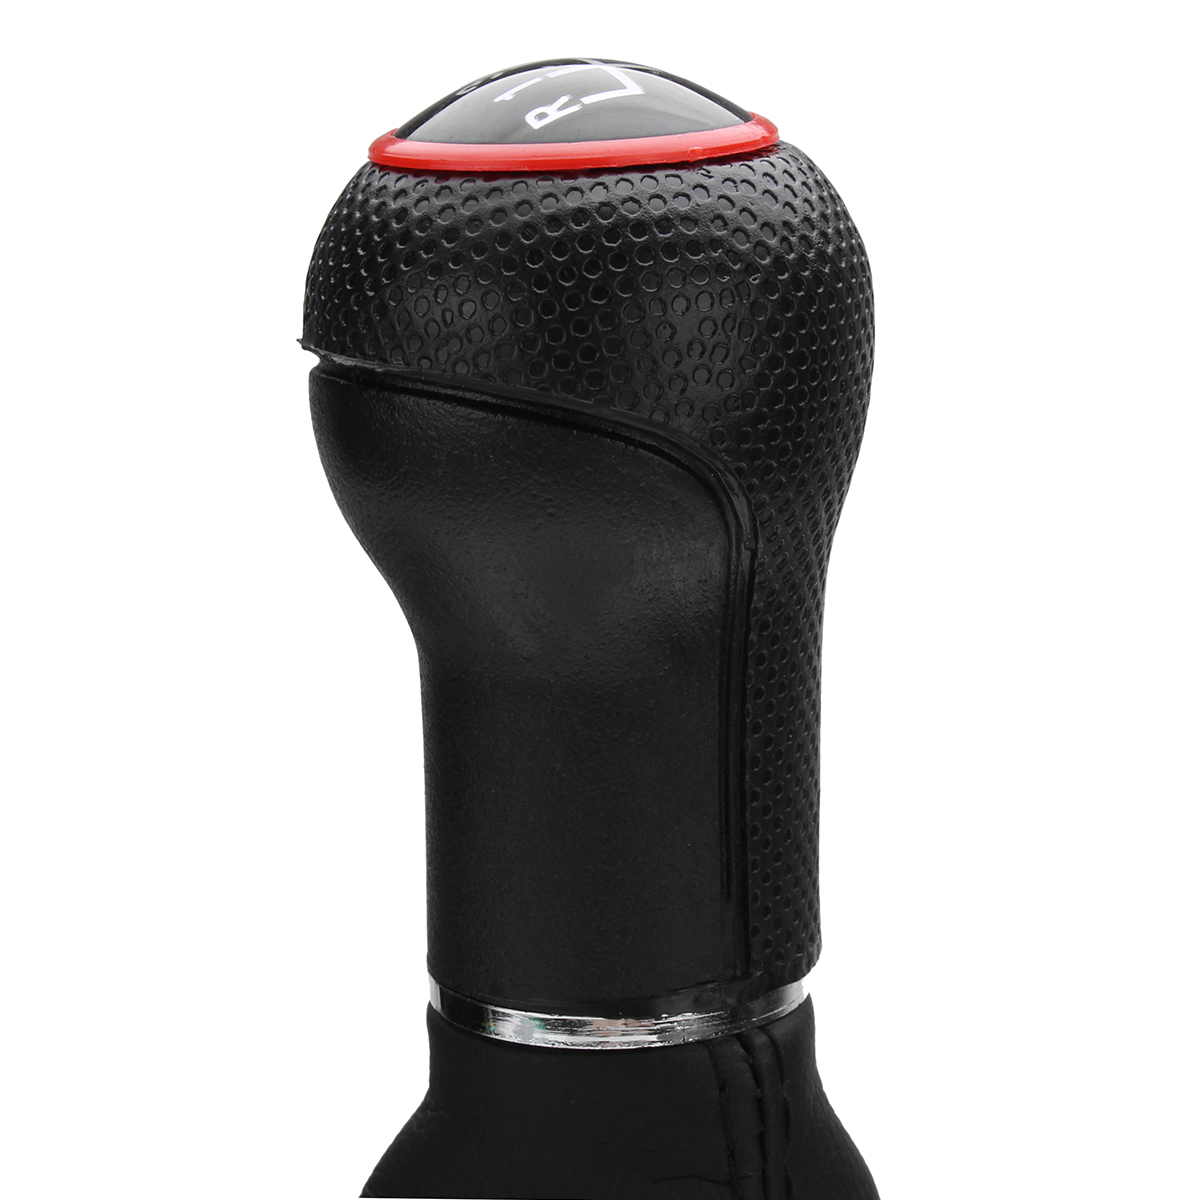 5/6 Speed Gear Shift Knob 23Mm Inner Shifter Gaitor Boot Cover for VW Golf 4 Bora GTI - Auto GoShop